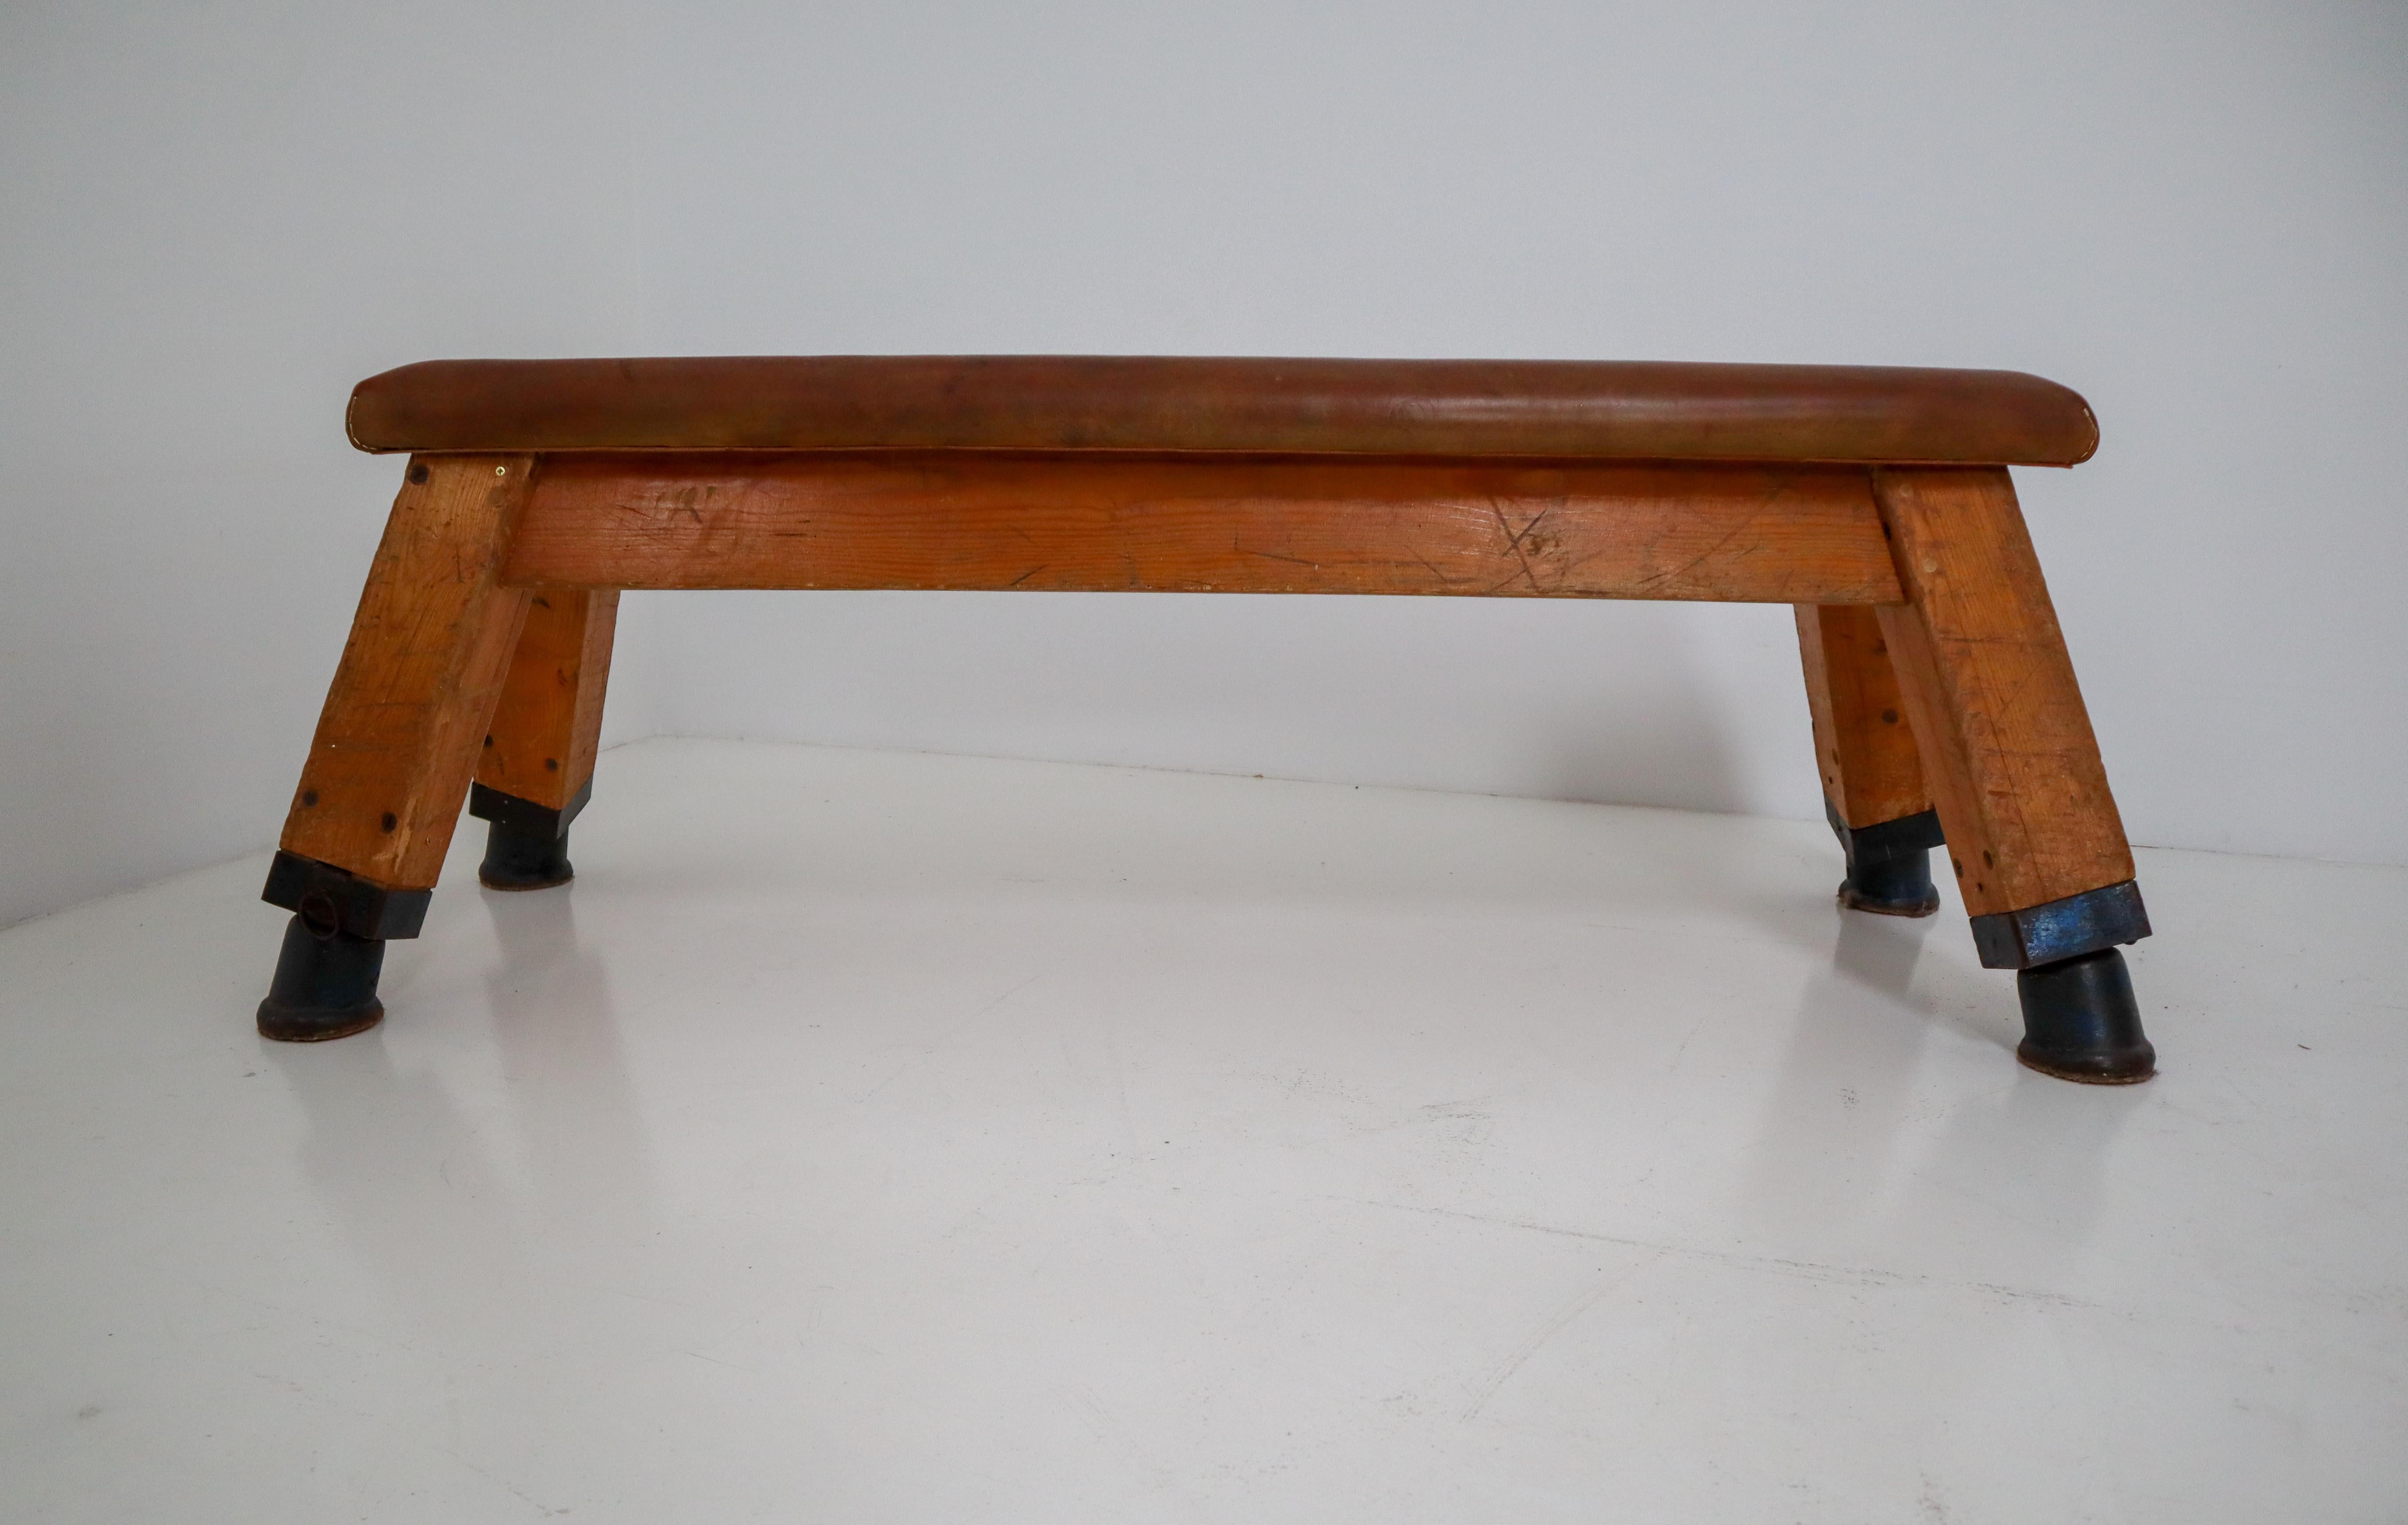 Mid-Century Modern European Vintage Patinated Leather Gym Bench or Table, circa 1950s